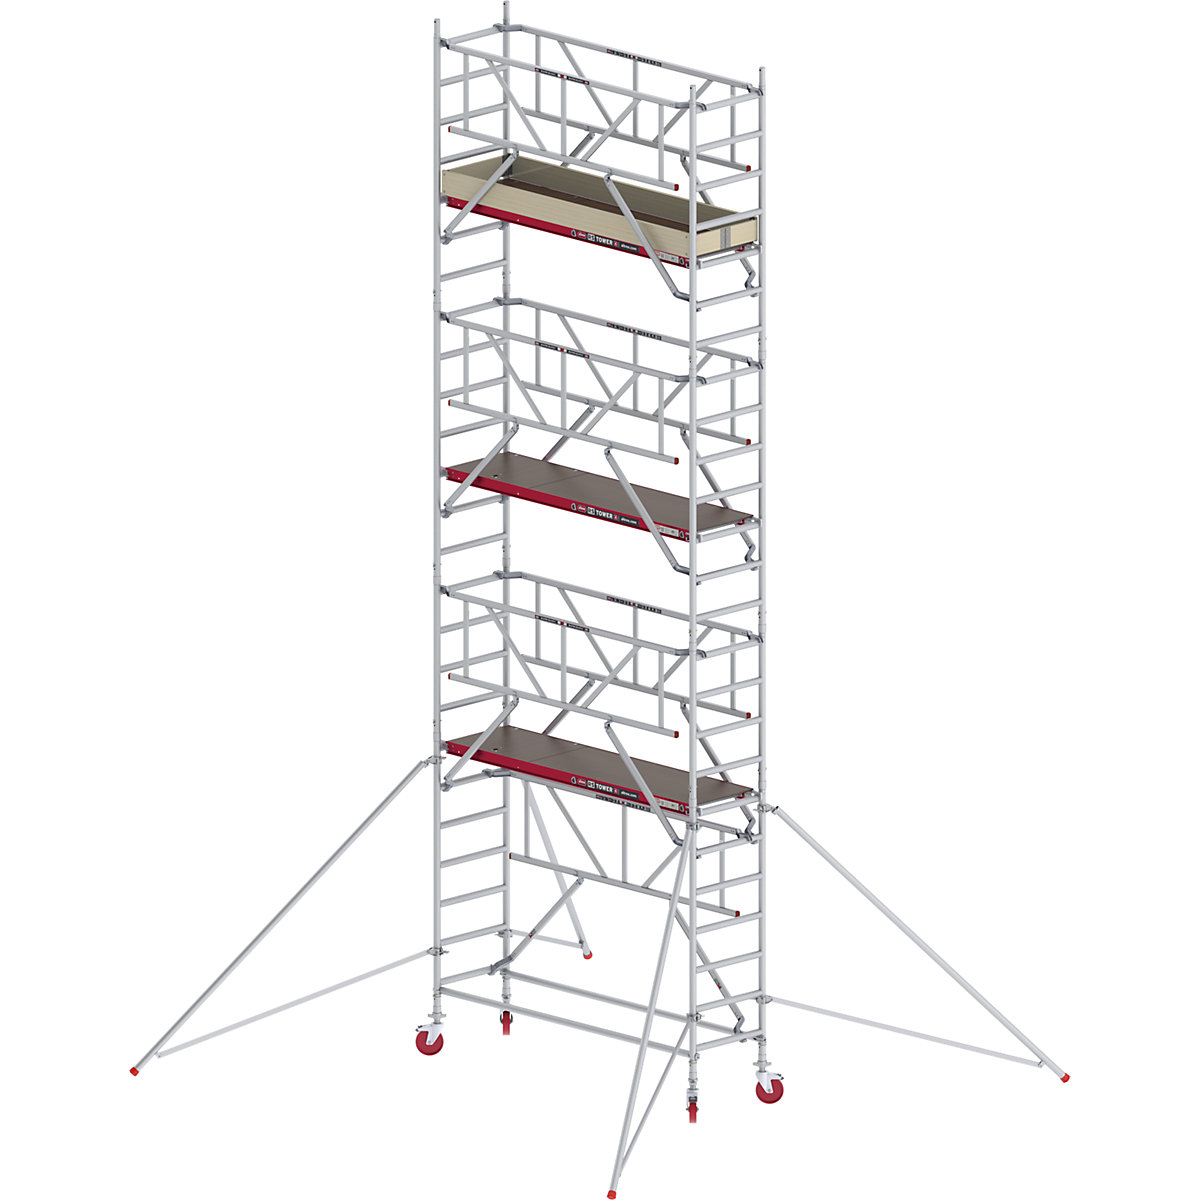 RS TOWER 41 slim mobile access tower with Safe-Quick® – Altrex, wooden platform, length 2.45 m, working height 8.20 m-4